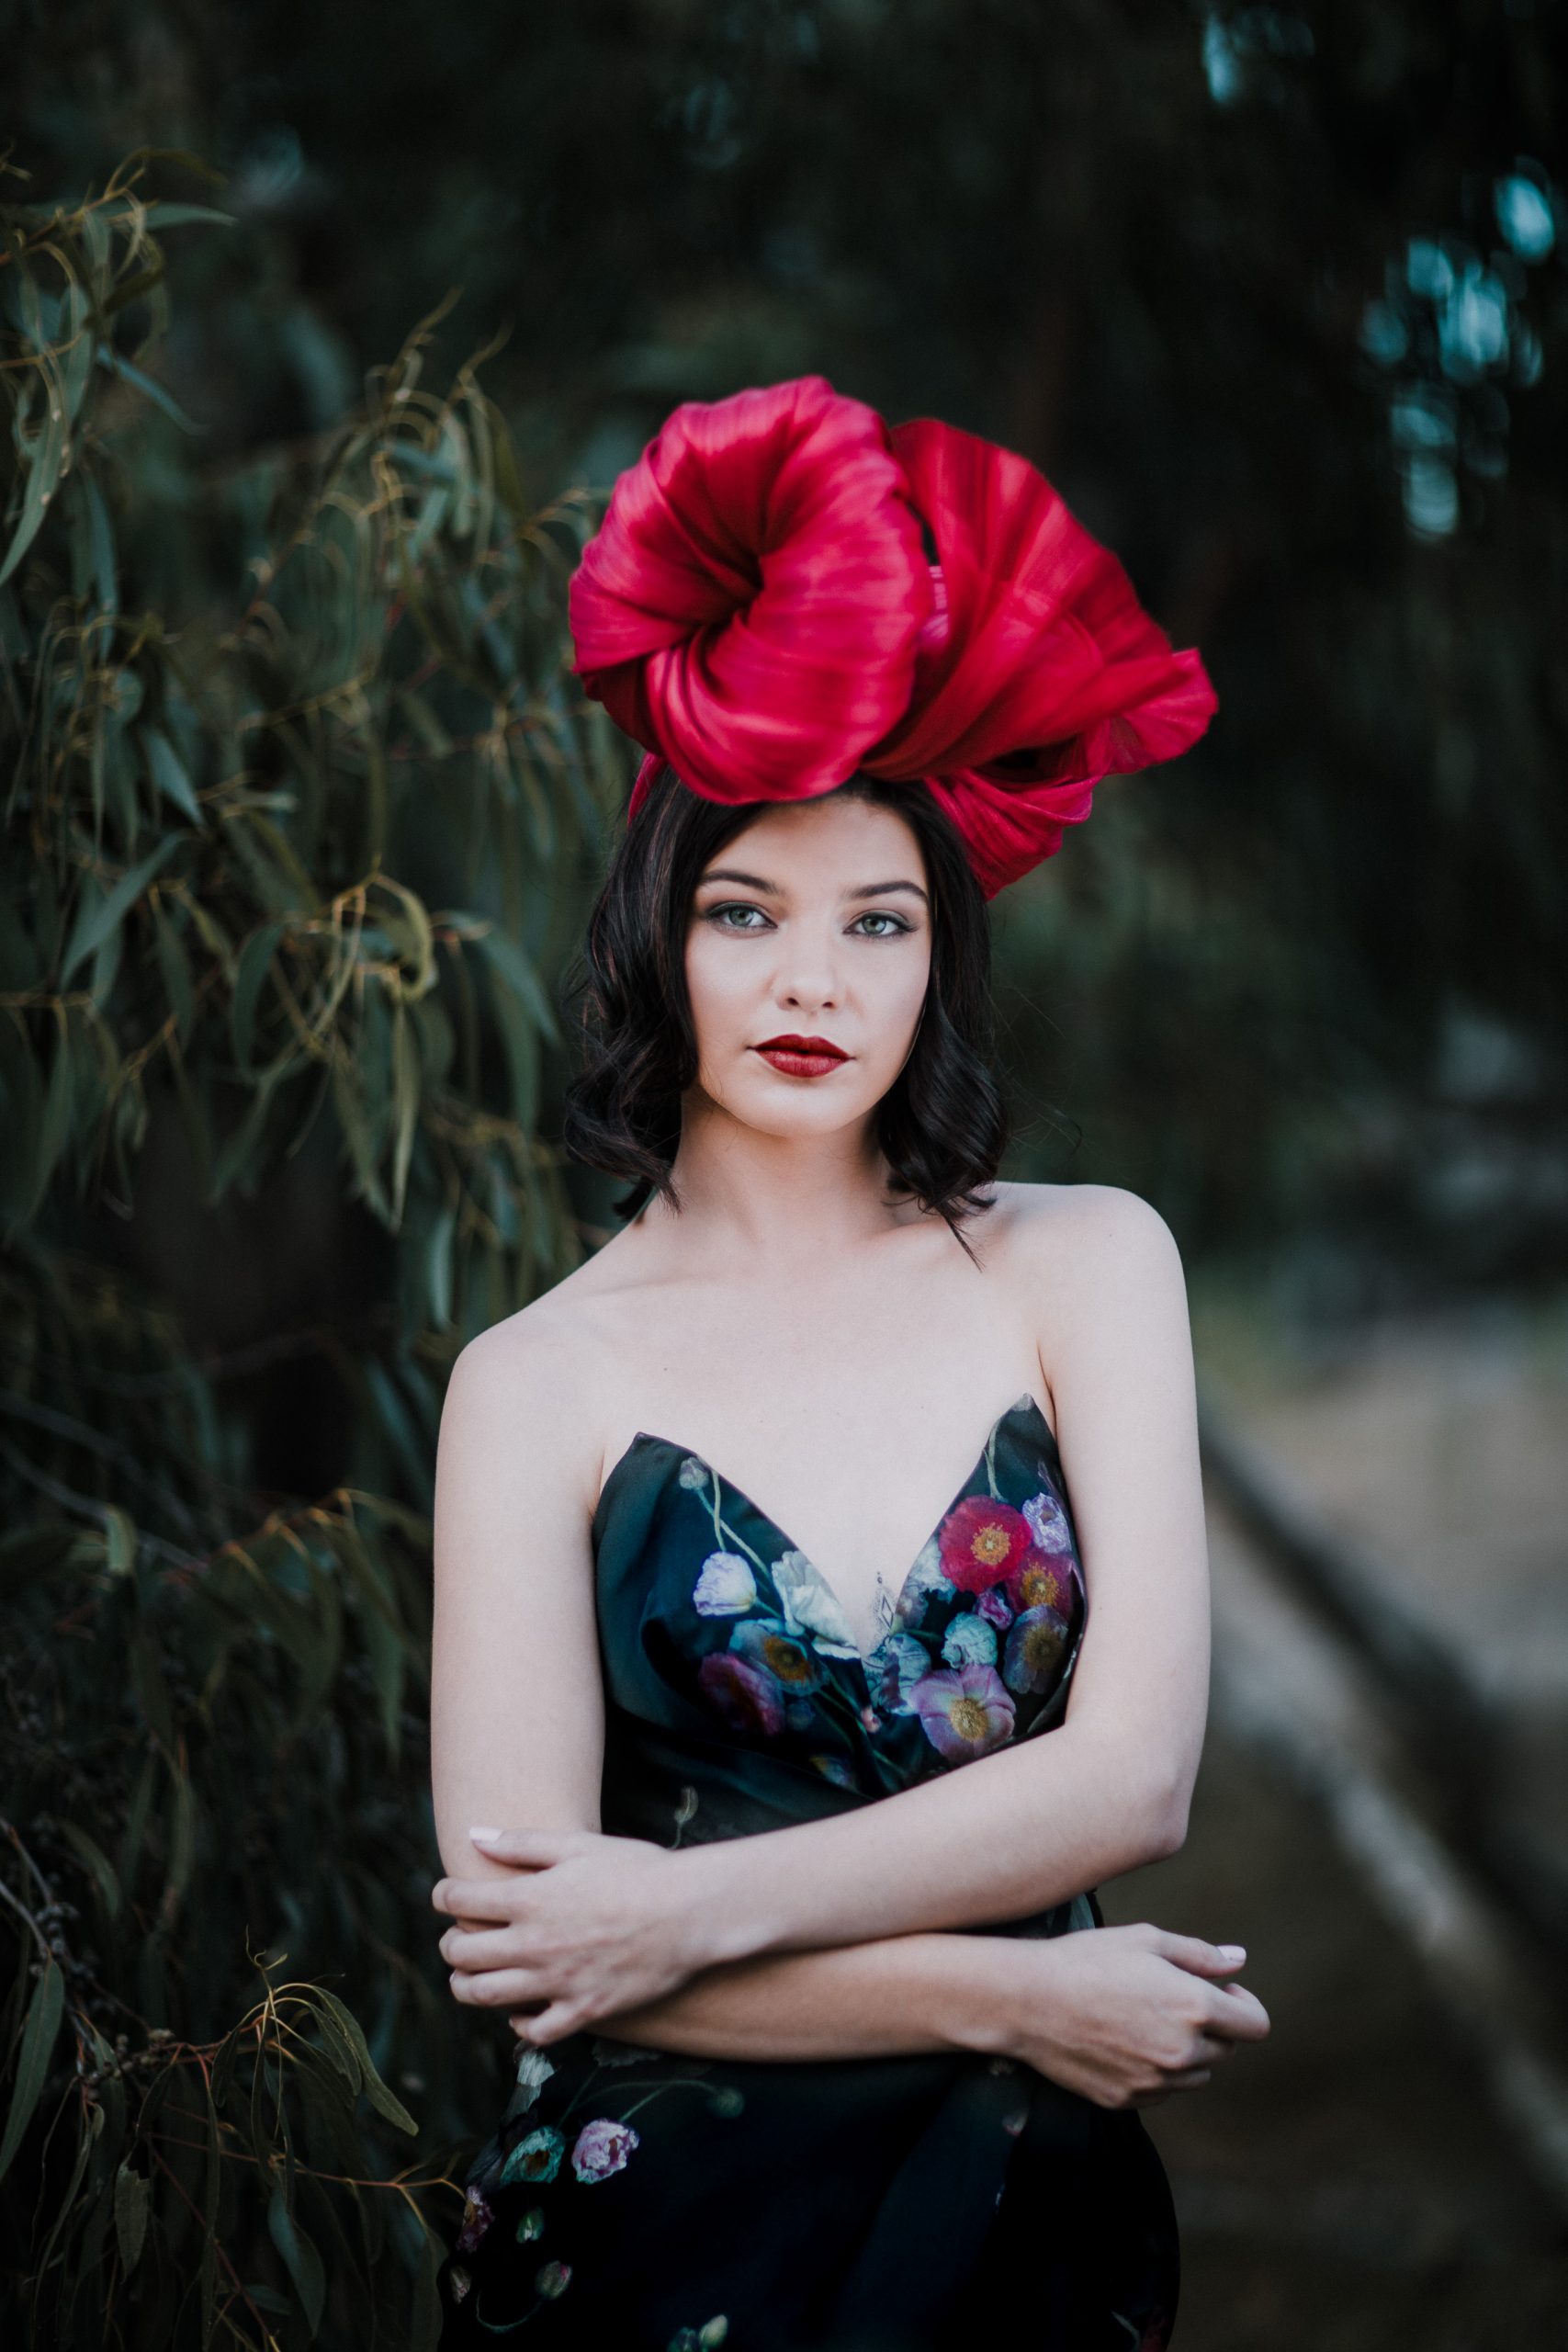 Red Millinery on model - millinery fashion photos